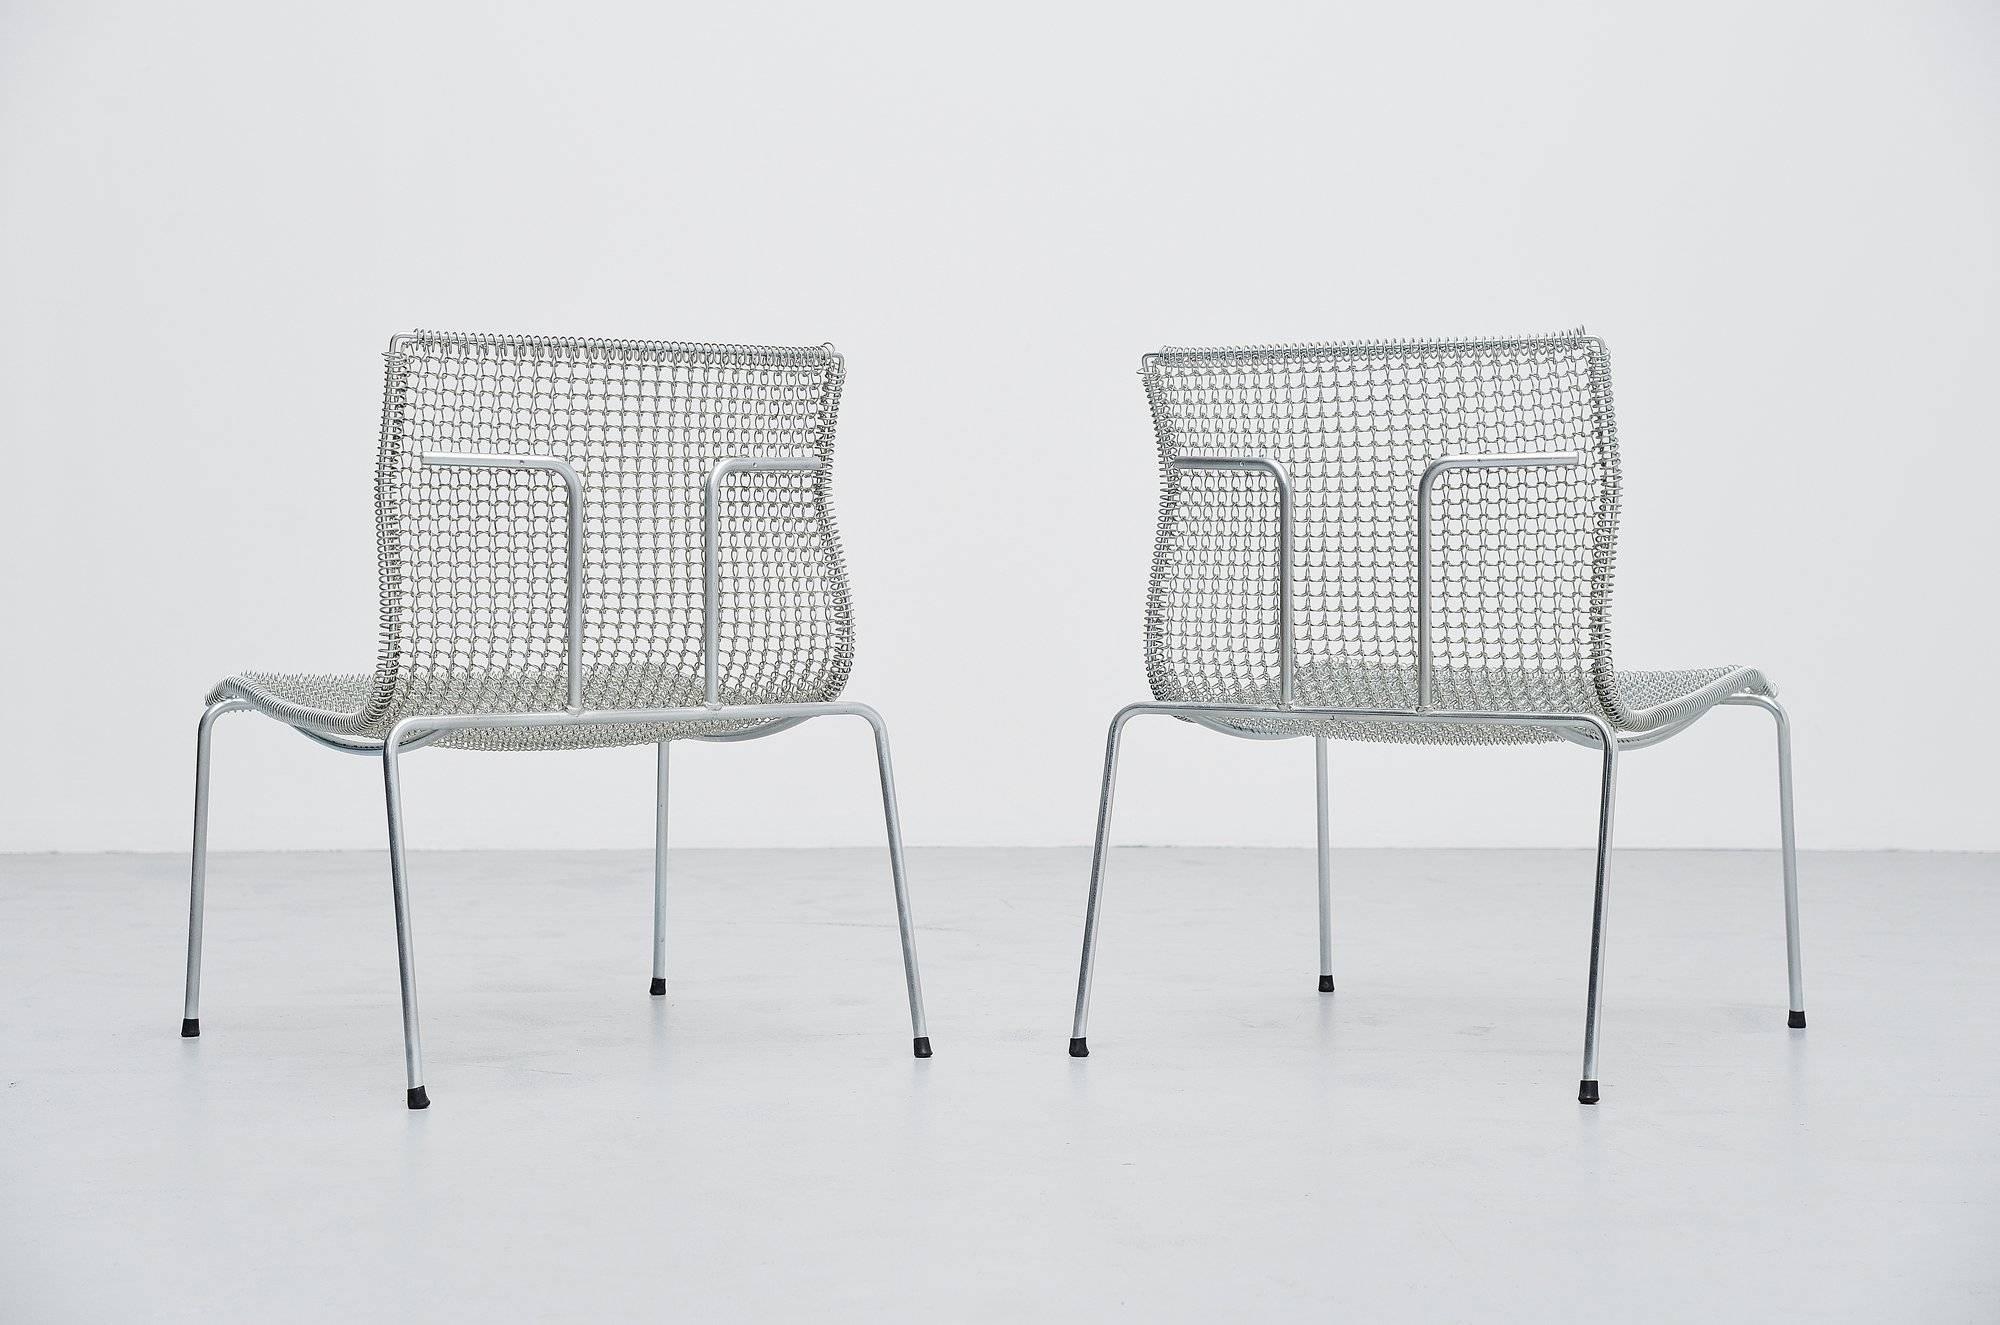 Nice pair of timeless easy chairs designed by Niall O'Flynn for 't Spectrum in 1997. These chairs were in production for only 4 years. Fantastic shaped chairs, made of galvanized metal. The chairs do not look really comfortable but they surprisingly